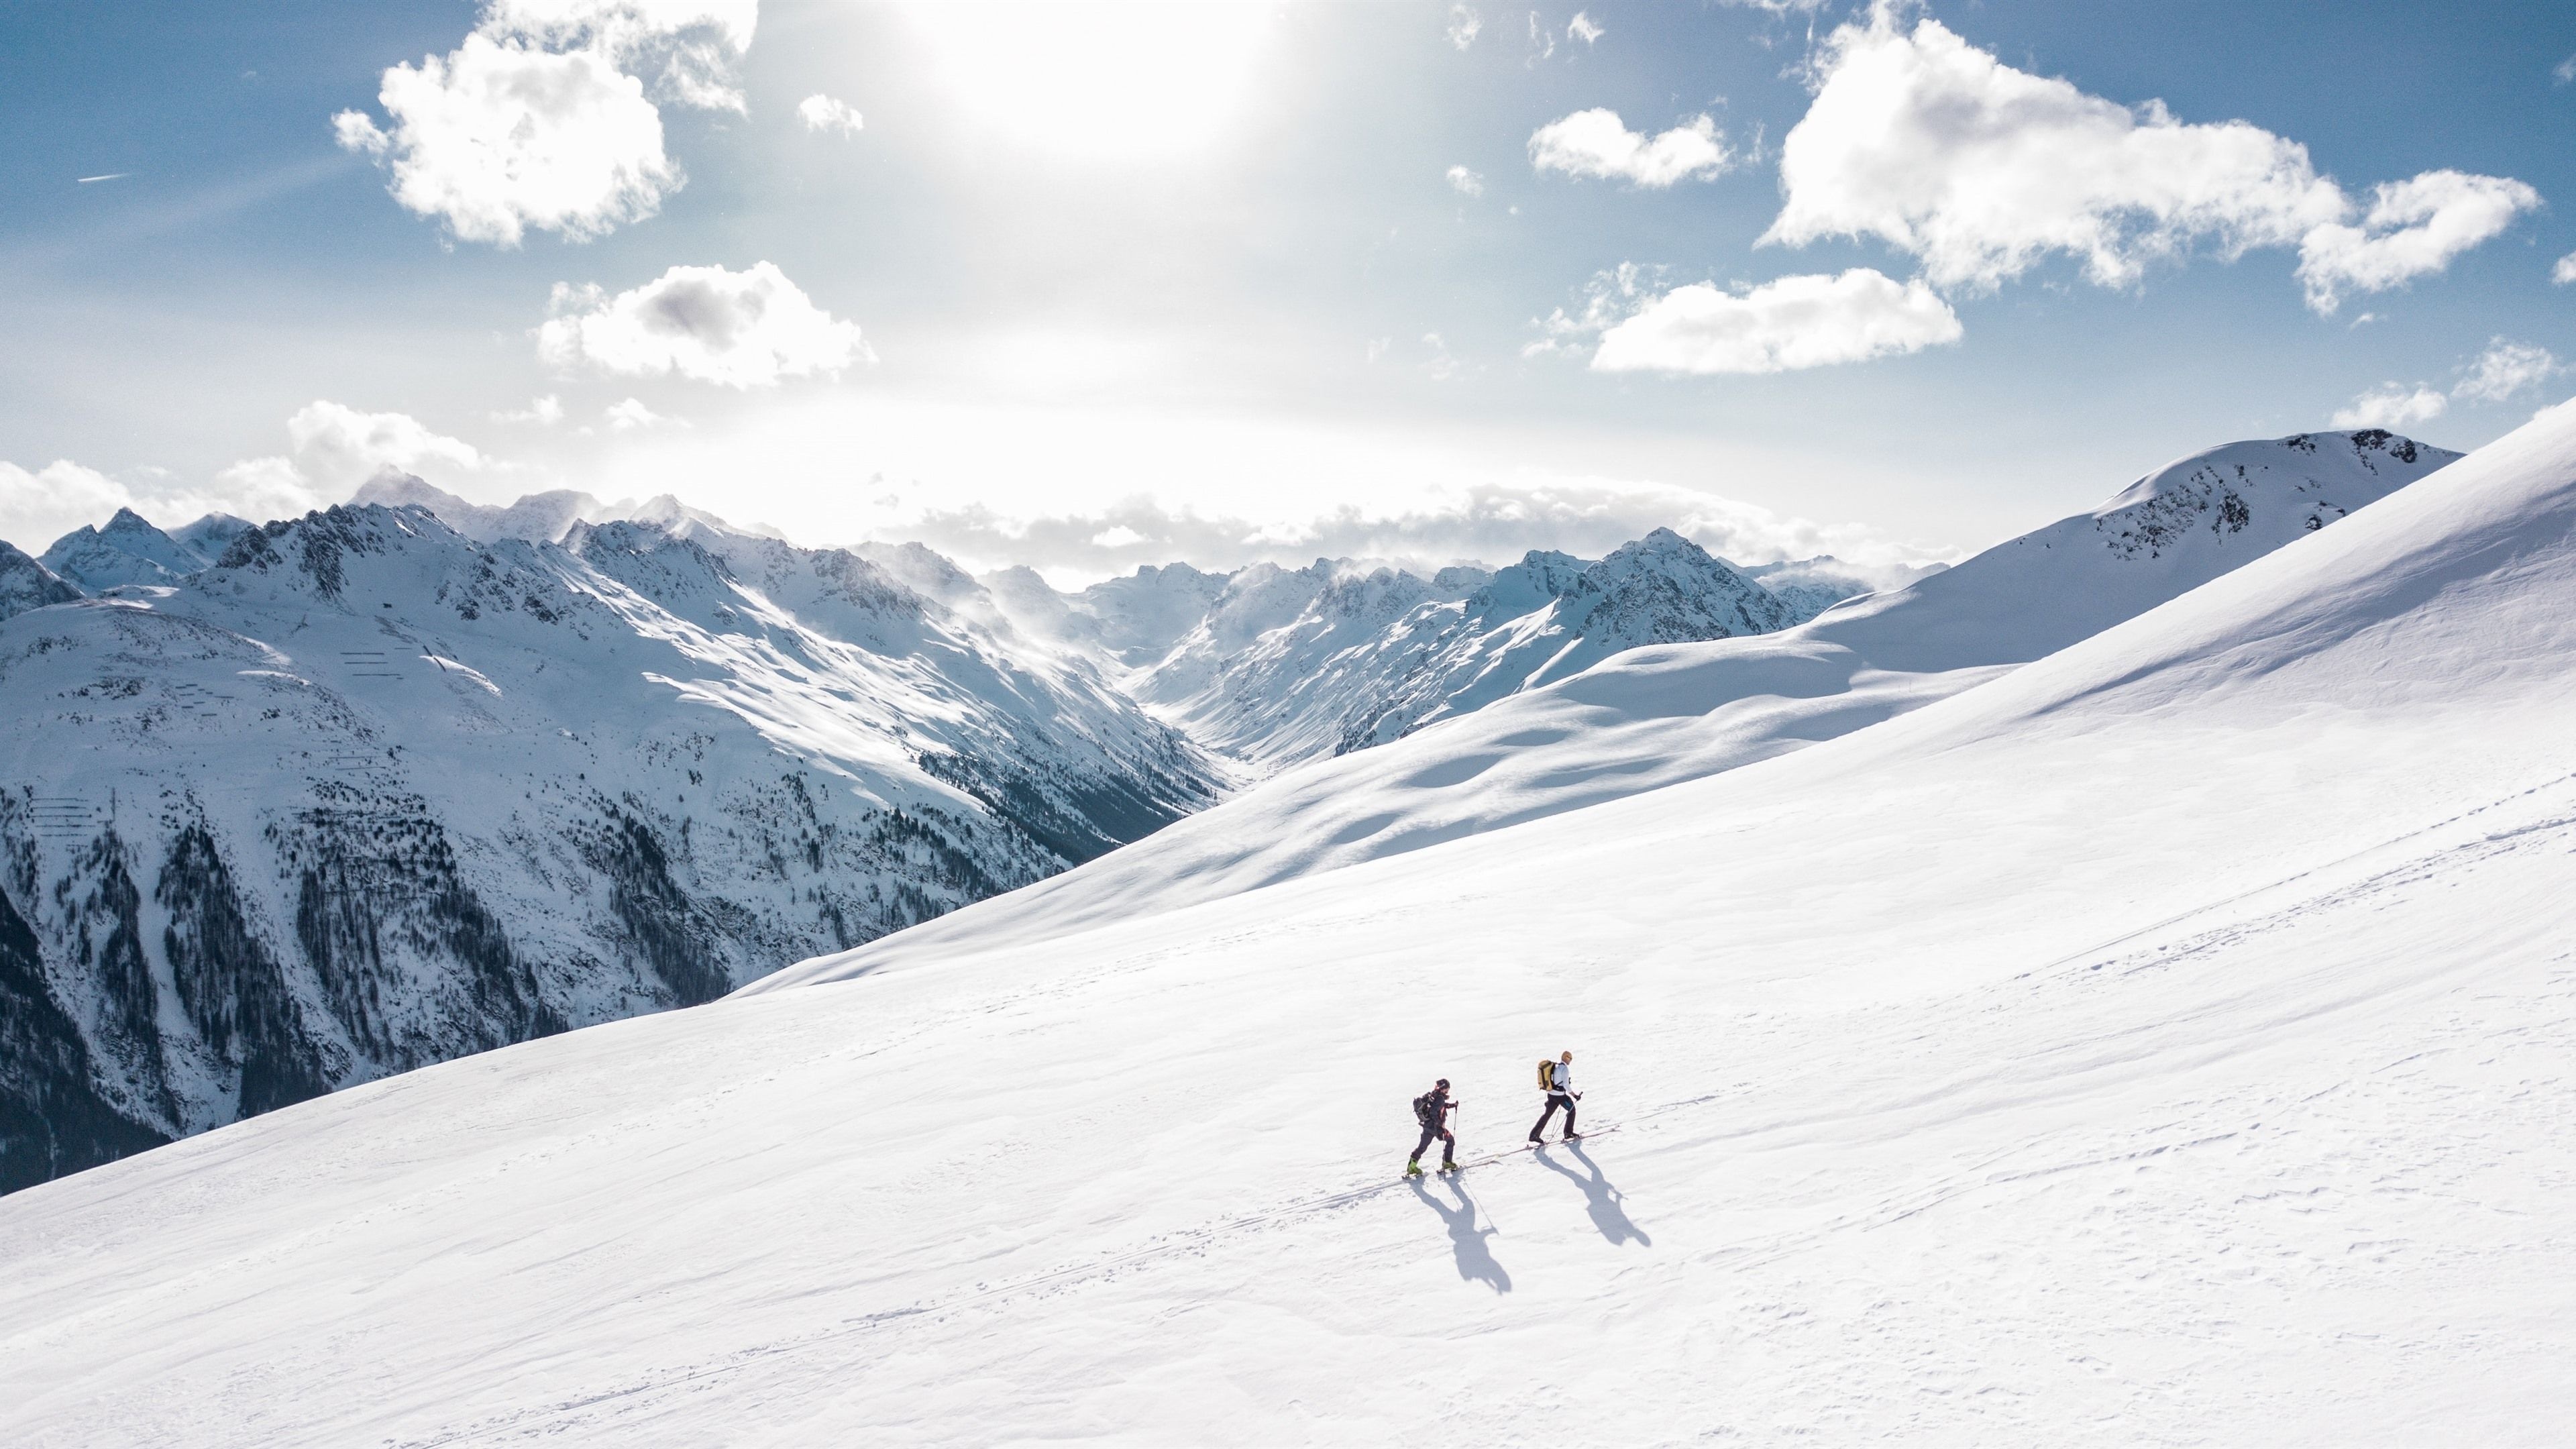 Alpine Skiing, Winter wallpapers, Snow-covered mountains, Serene landscapes, 3840x2160 4K Desktop